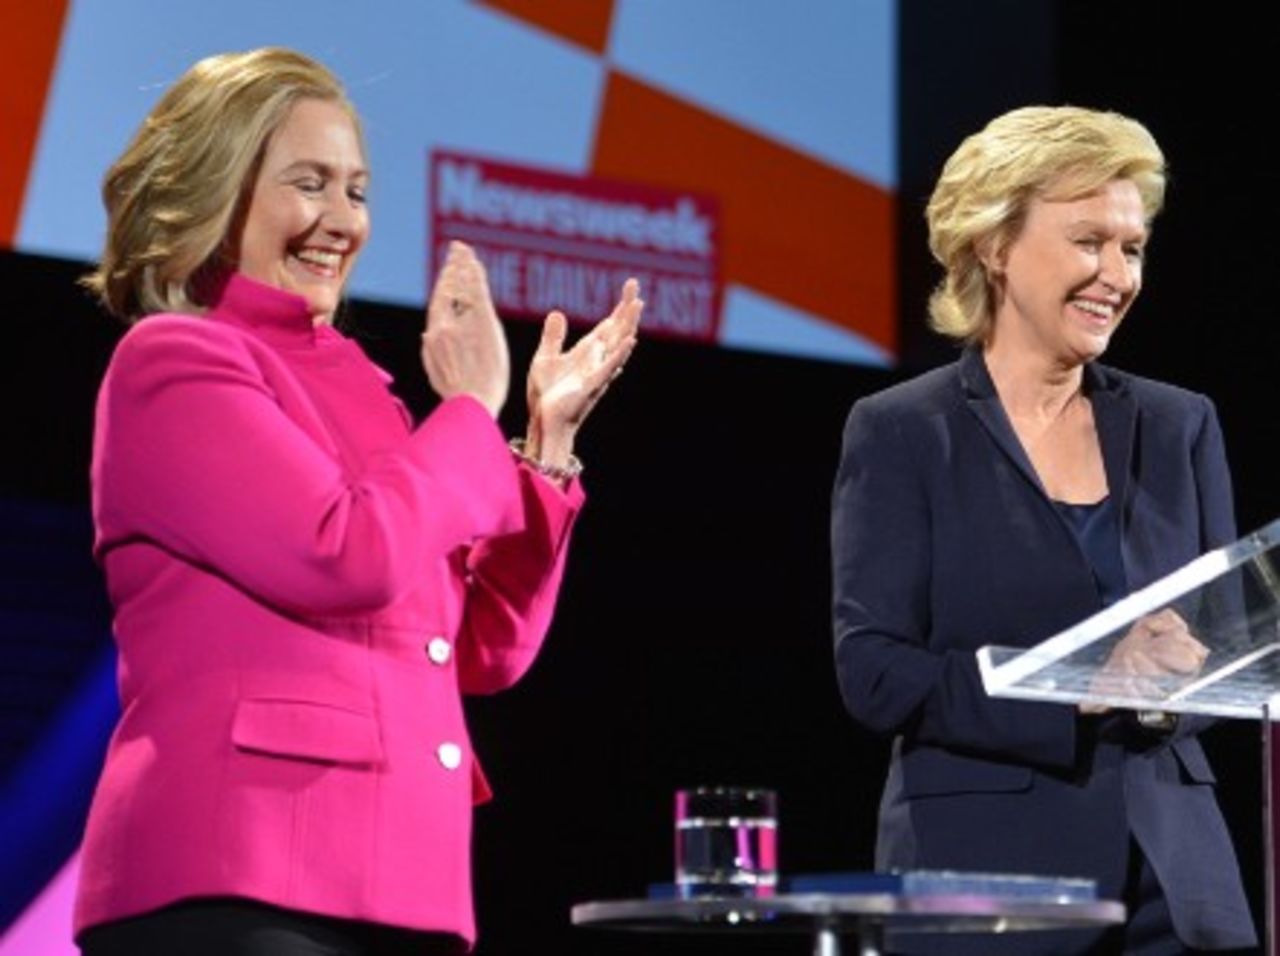 Tina Brown shares a stage with former Secretary of State Hillary Clinton at the 2013 Women In The World summit which she organizes with The Daily Beast - (Courtesy Marc Bryan Brown)